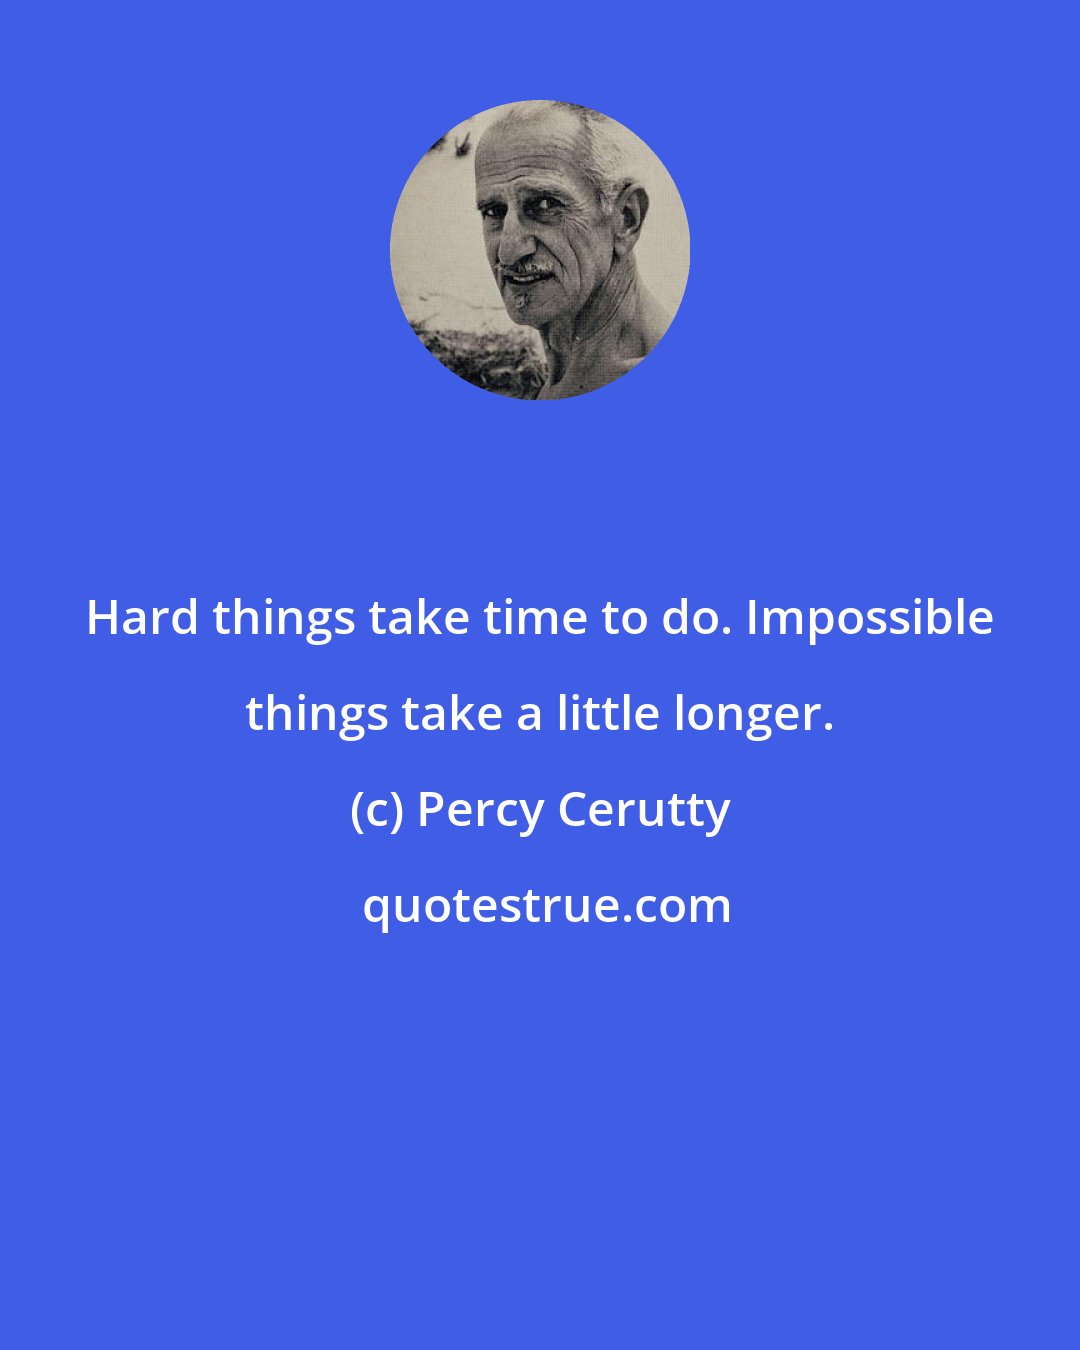 Percy Cerutty: Hard things take time to do. Impossible things take a little longer.